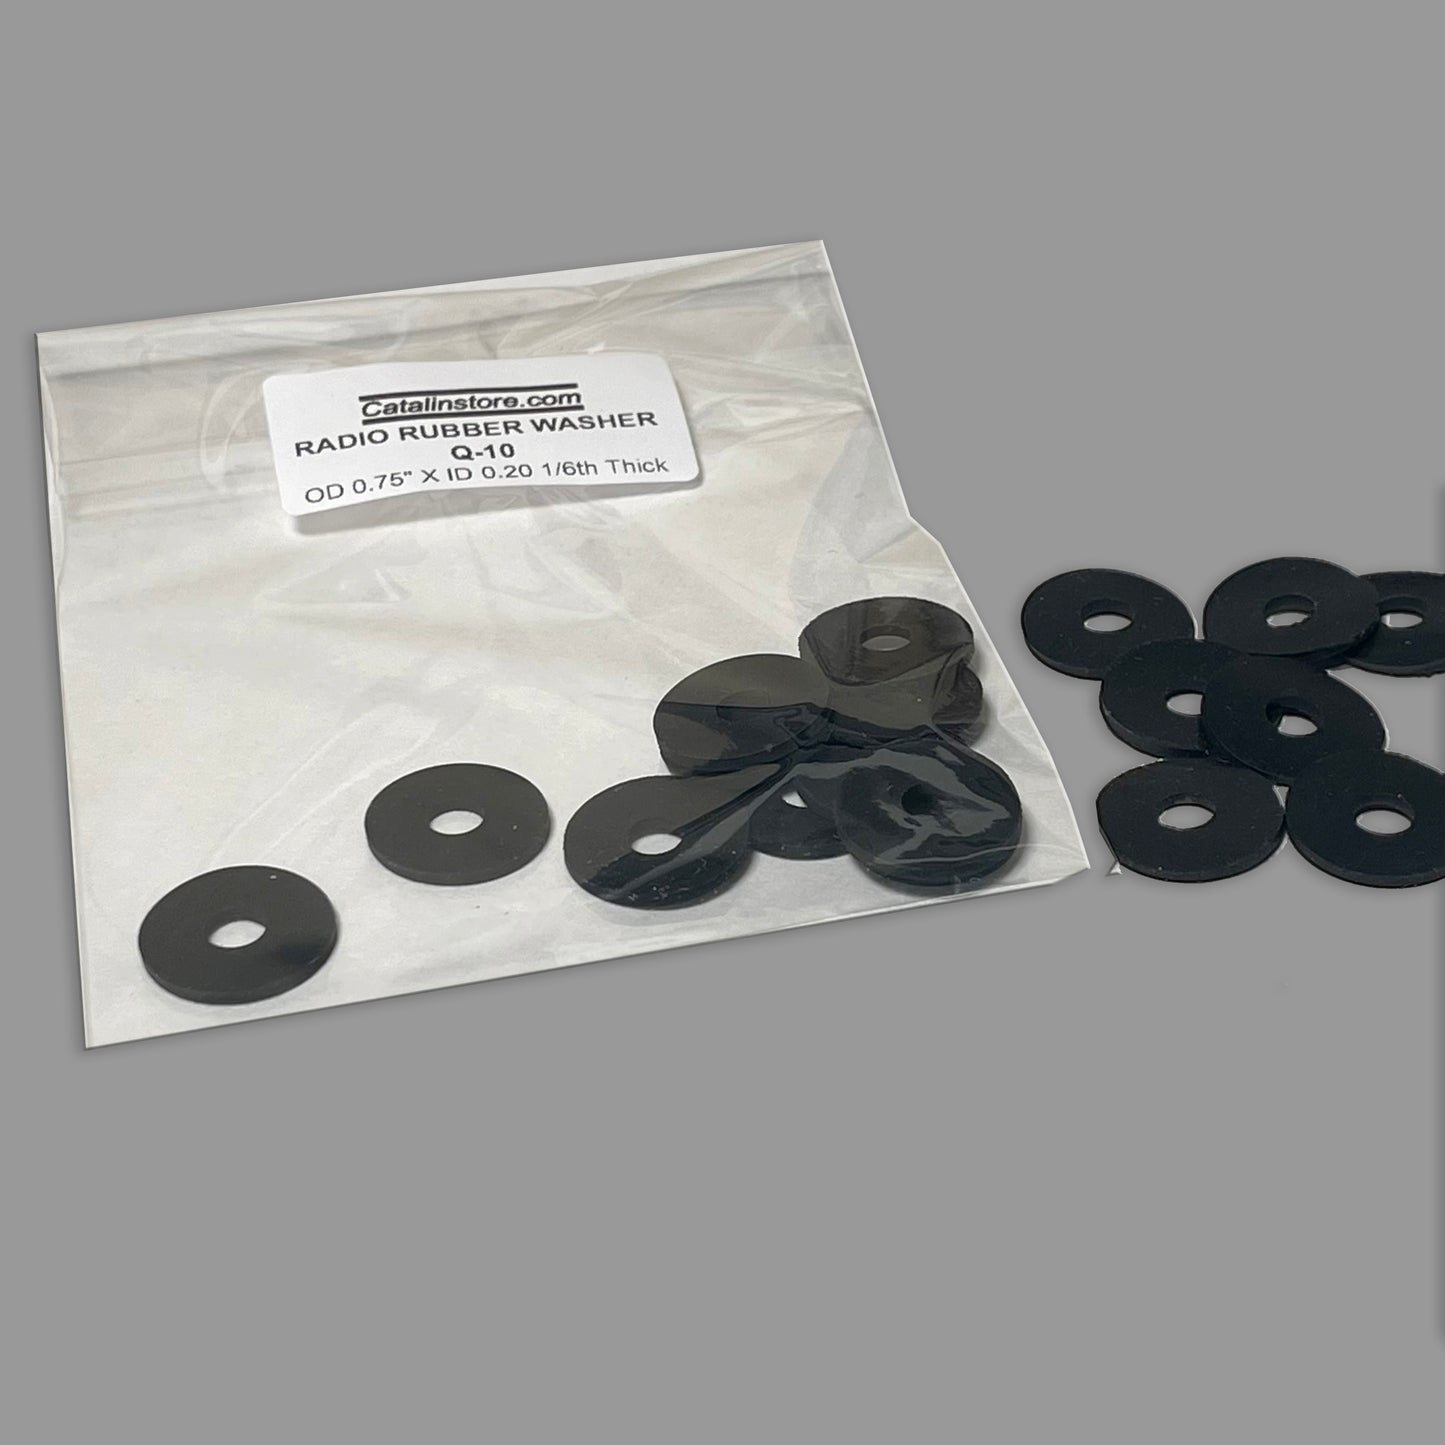 Radio Black Rubber Washer- 0.75" OD, .20 ID  1/16th" Thick (PCK 10)